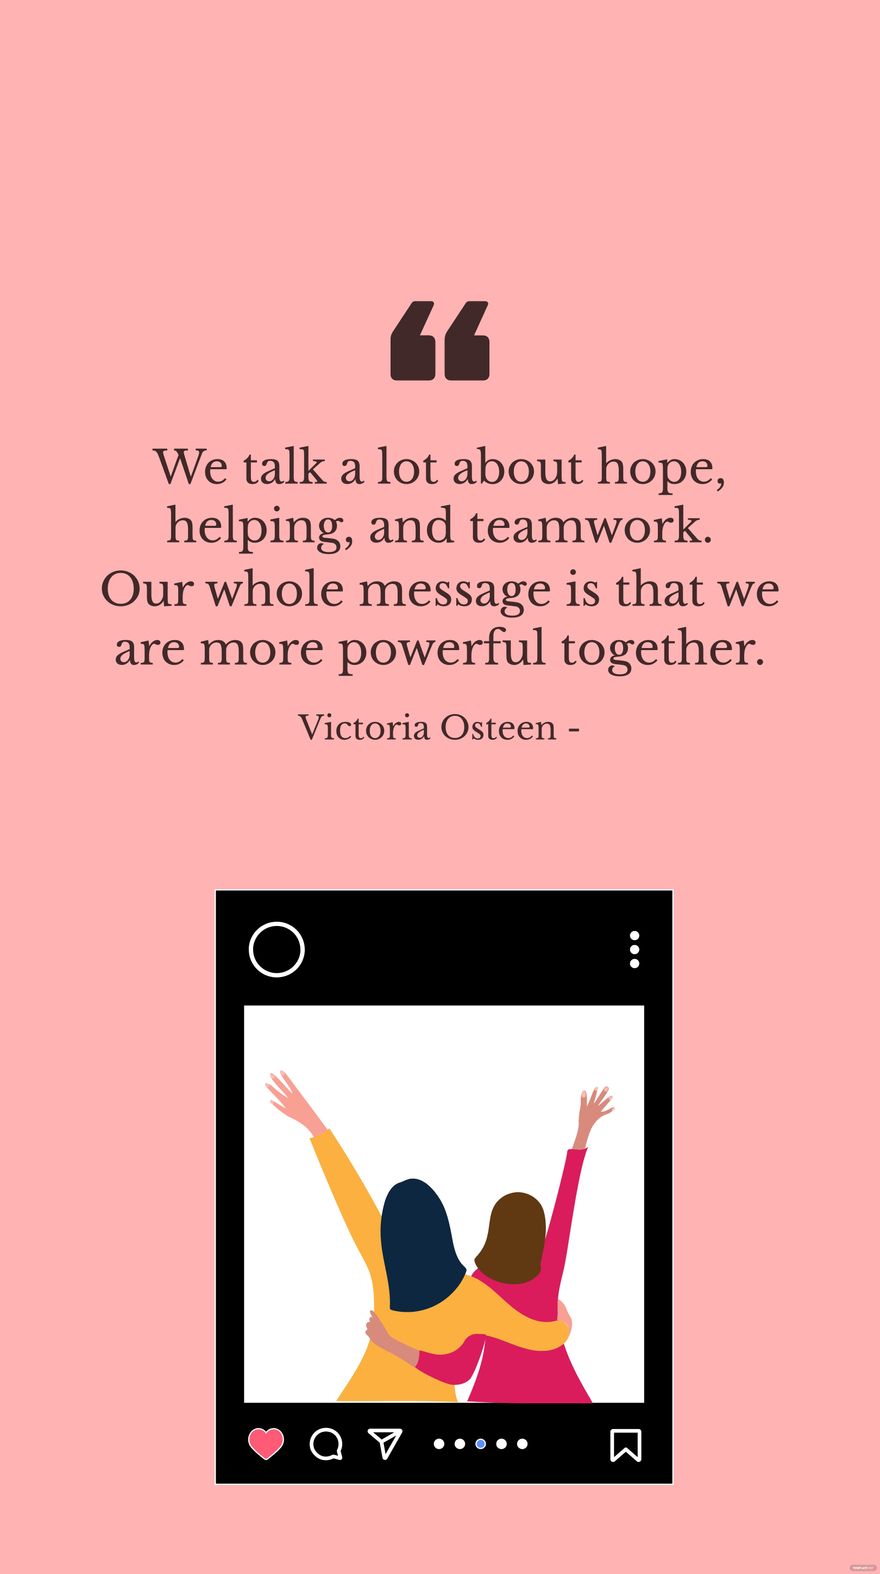 Victoria Osteen - We talk a lot about hope, helping, and teamwork. Our whole message is that we are more powerful together.